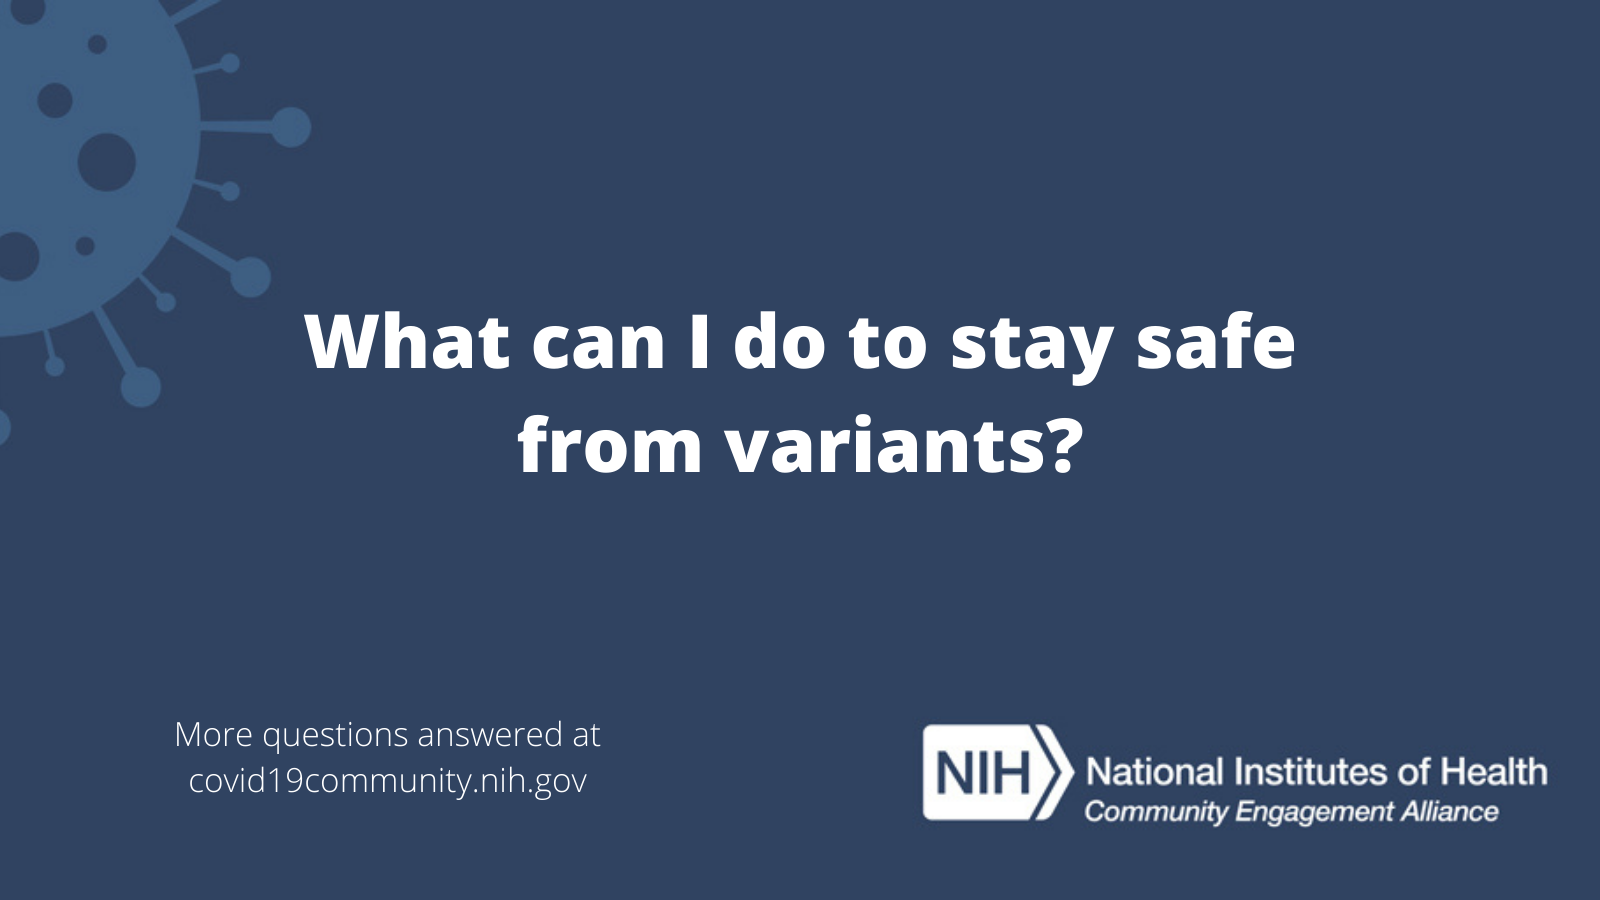 What can I do to stay safe from variants? More vaccine questions answered at covid19community.nih.gov